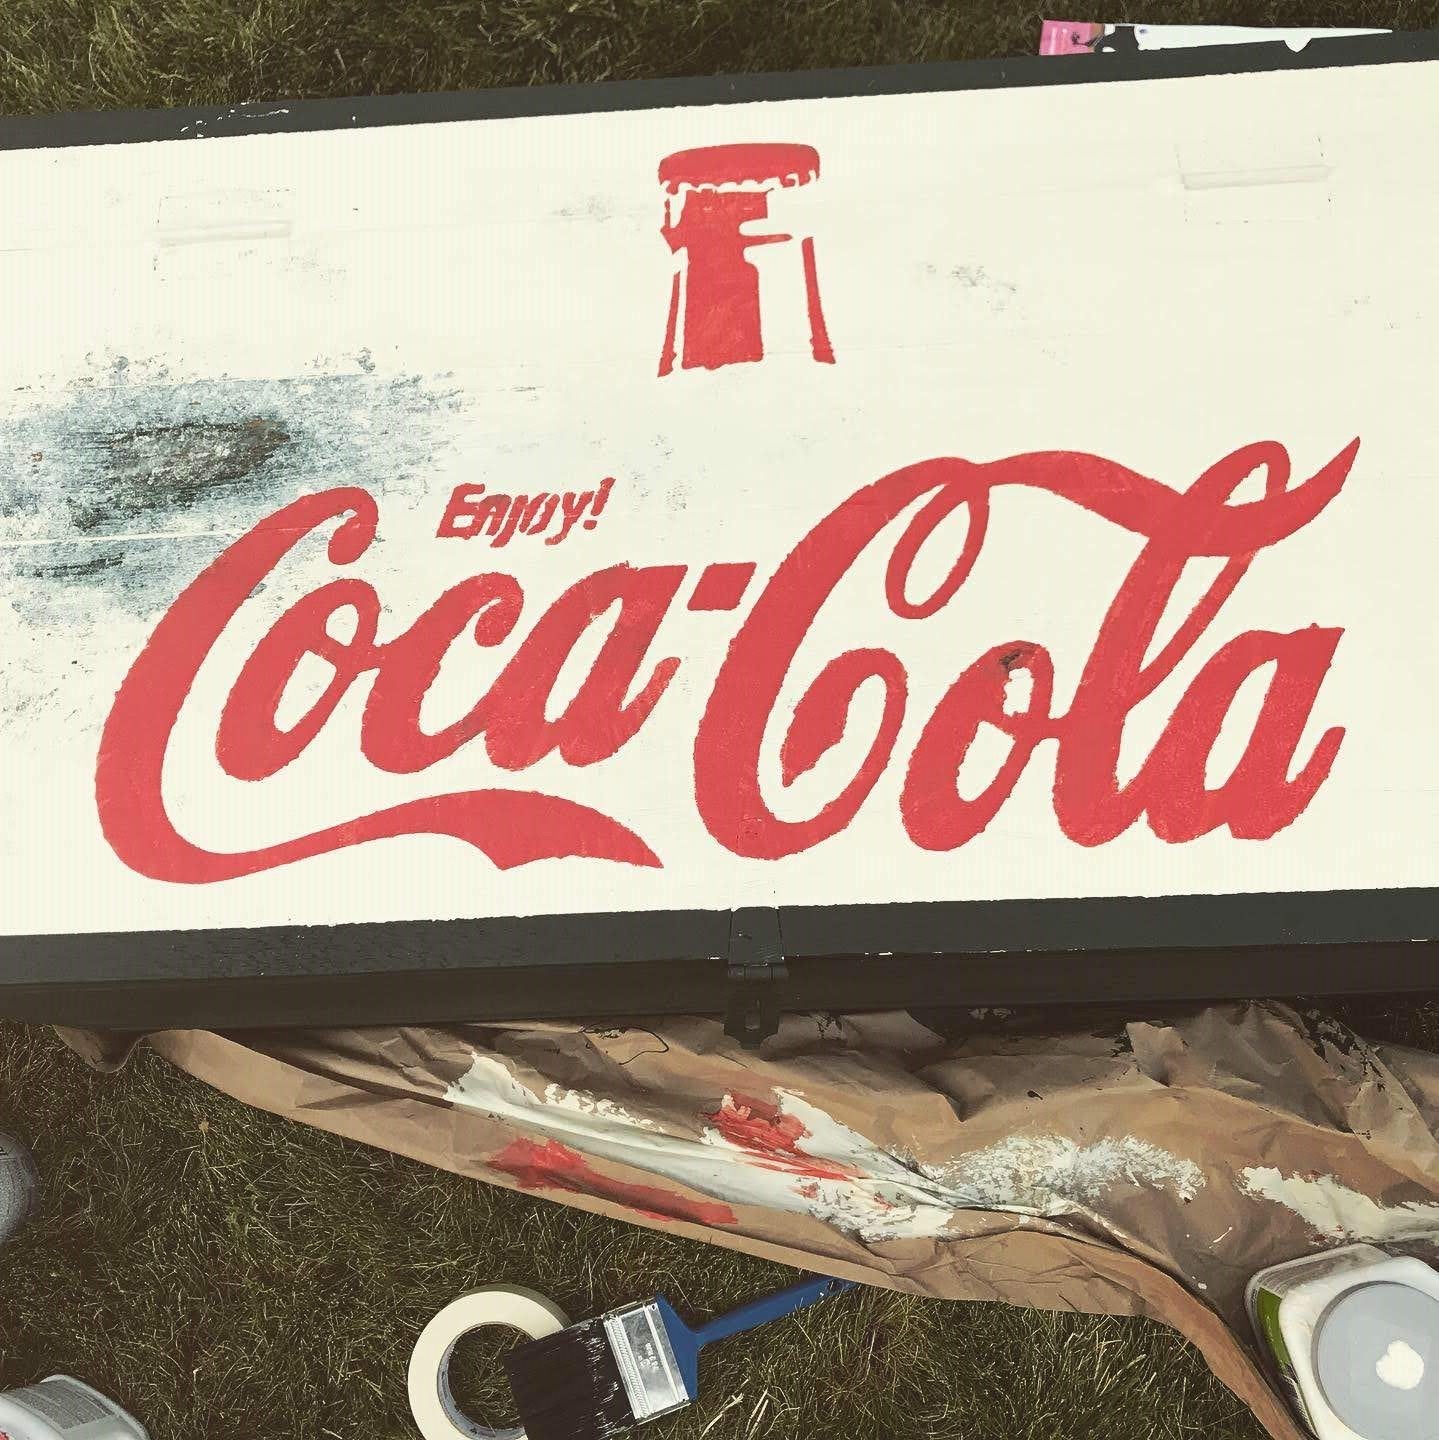 vintage style enjoy coca-cola advertising sign painted on wood